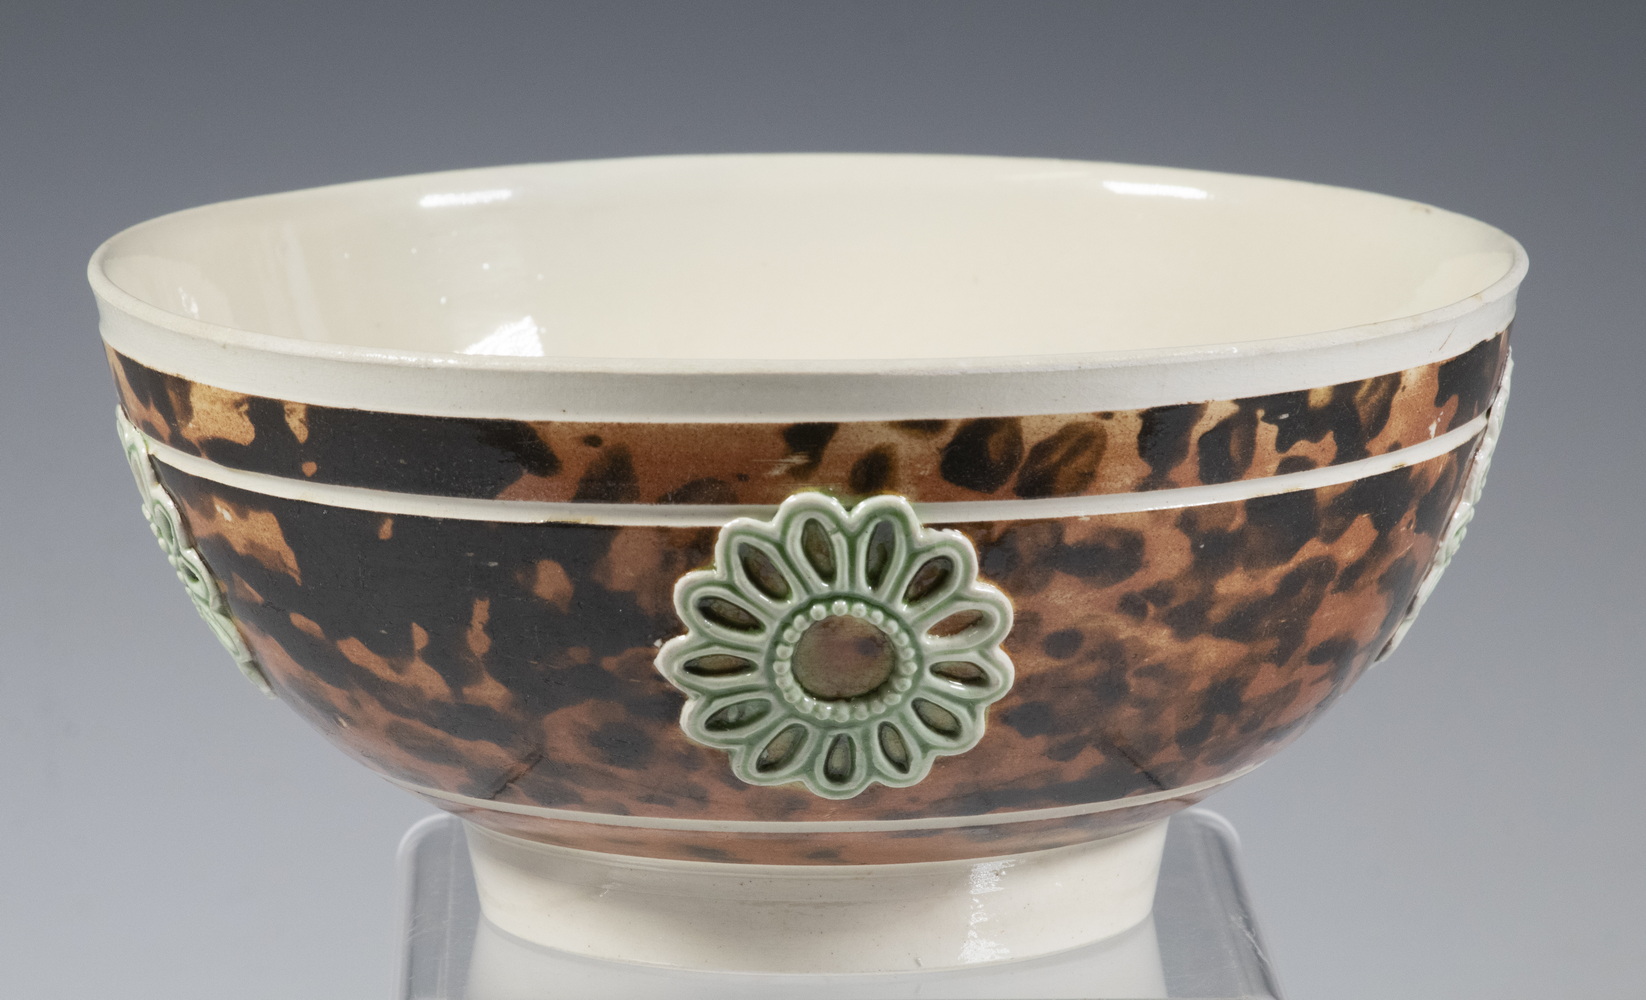 MARBLED MOCHA WARE BOWL Late 18th